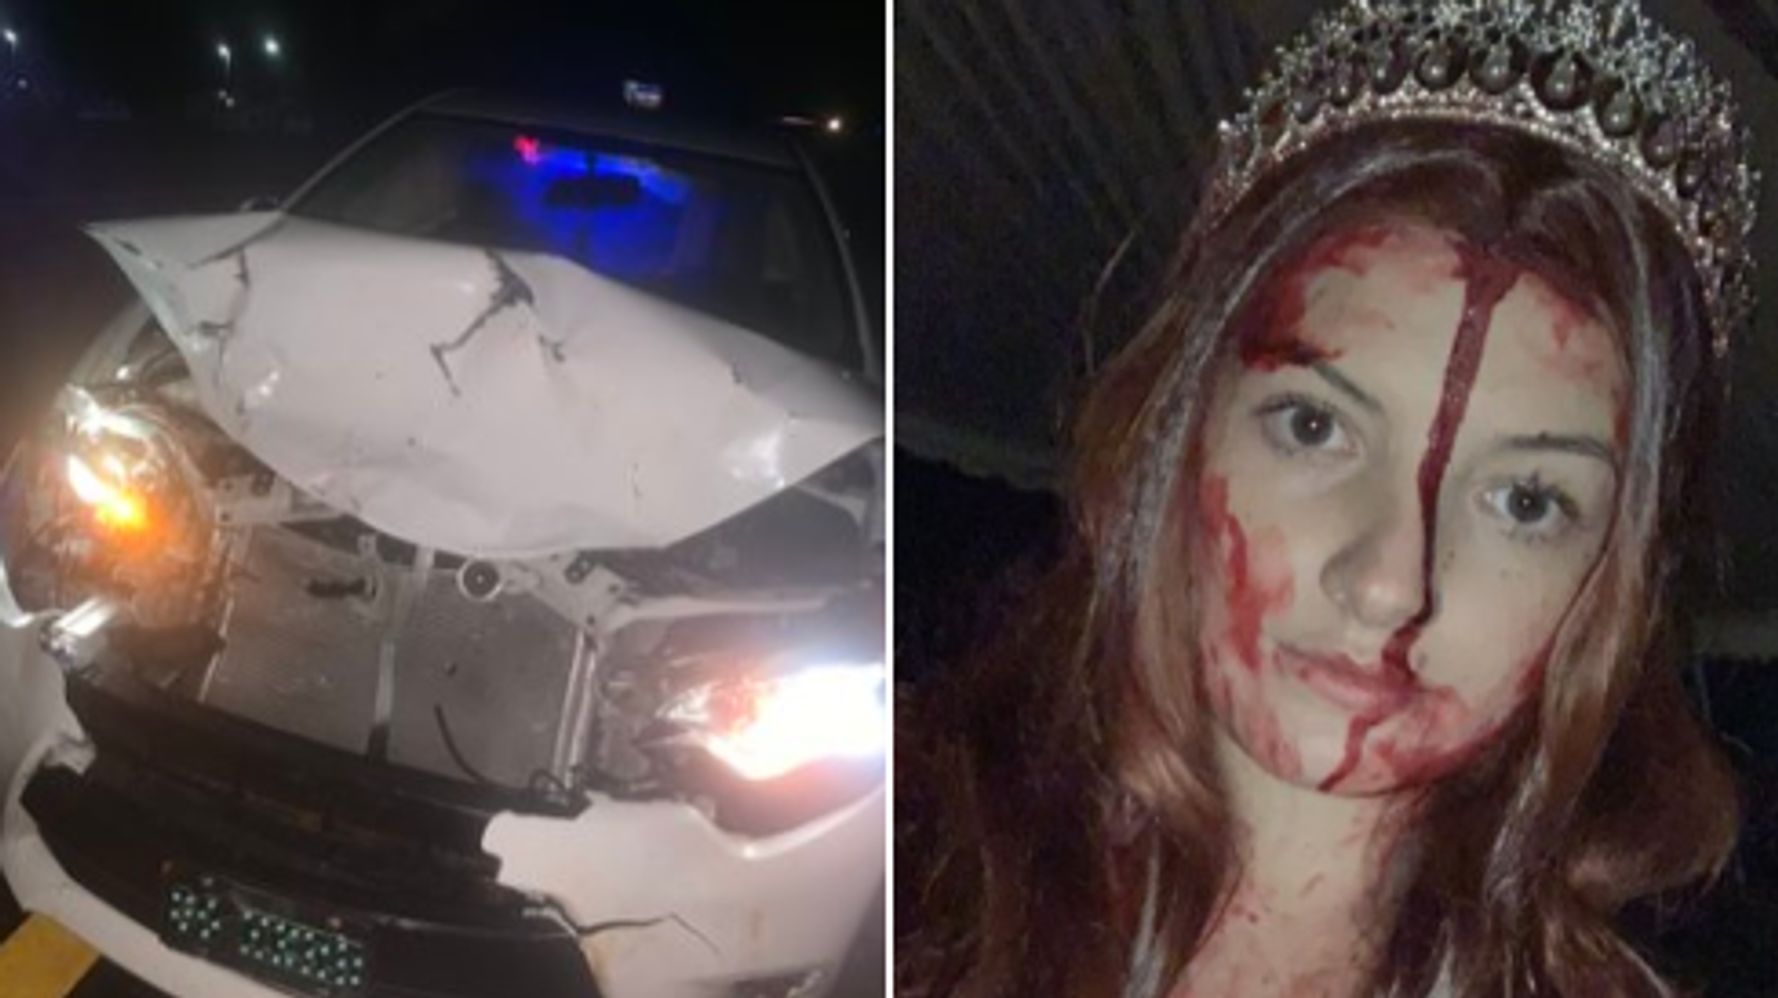 Tether Livlig plisseret Woman In Bloody 'Carrie' Costume Horrifies First Responders After Car Crash  | HuffPost Weird News